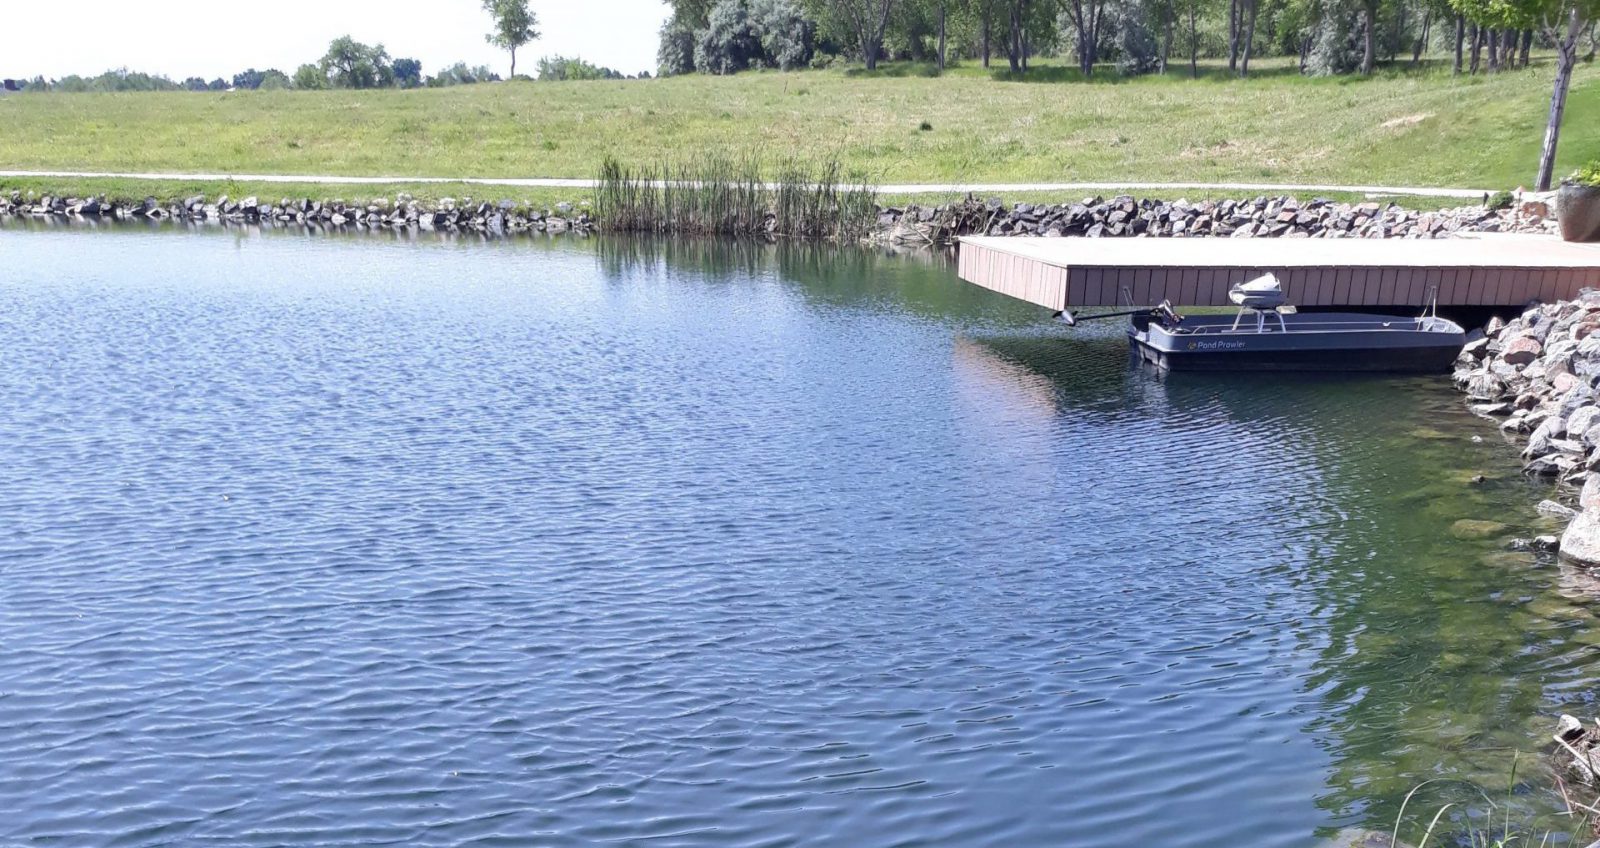 Broomfield HOA_AFTER algae and aquatic weed control stormwater management and compliance